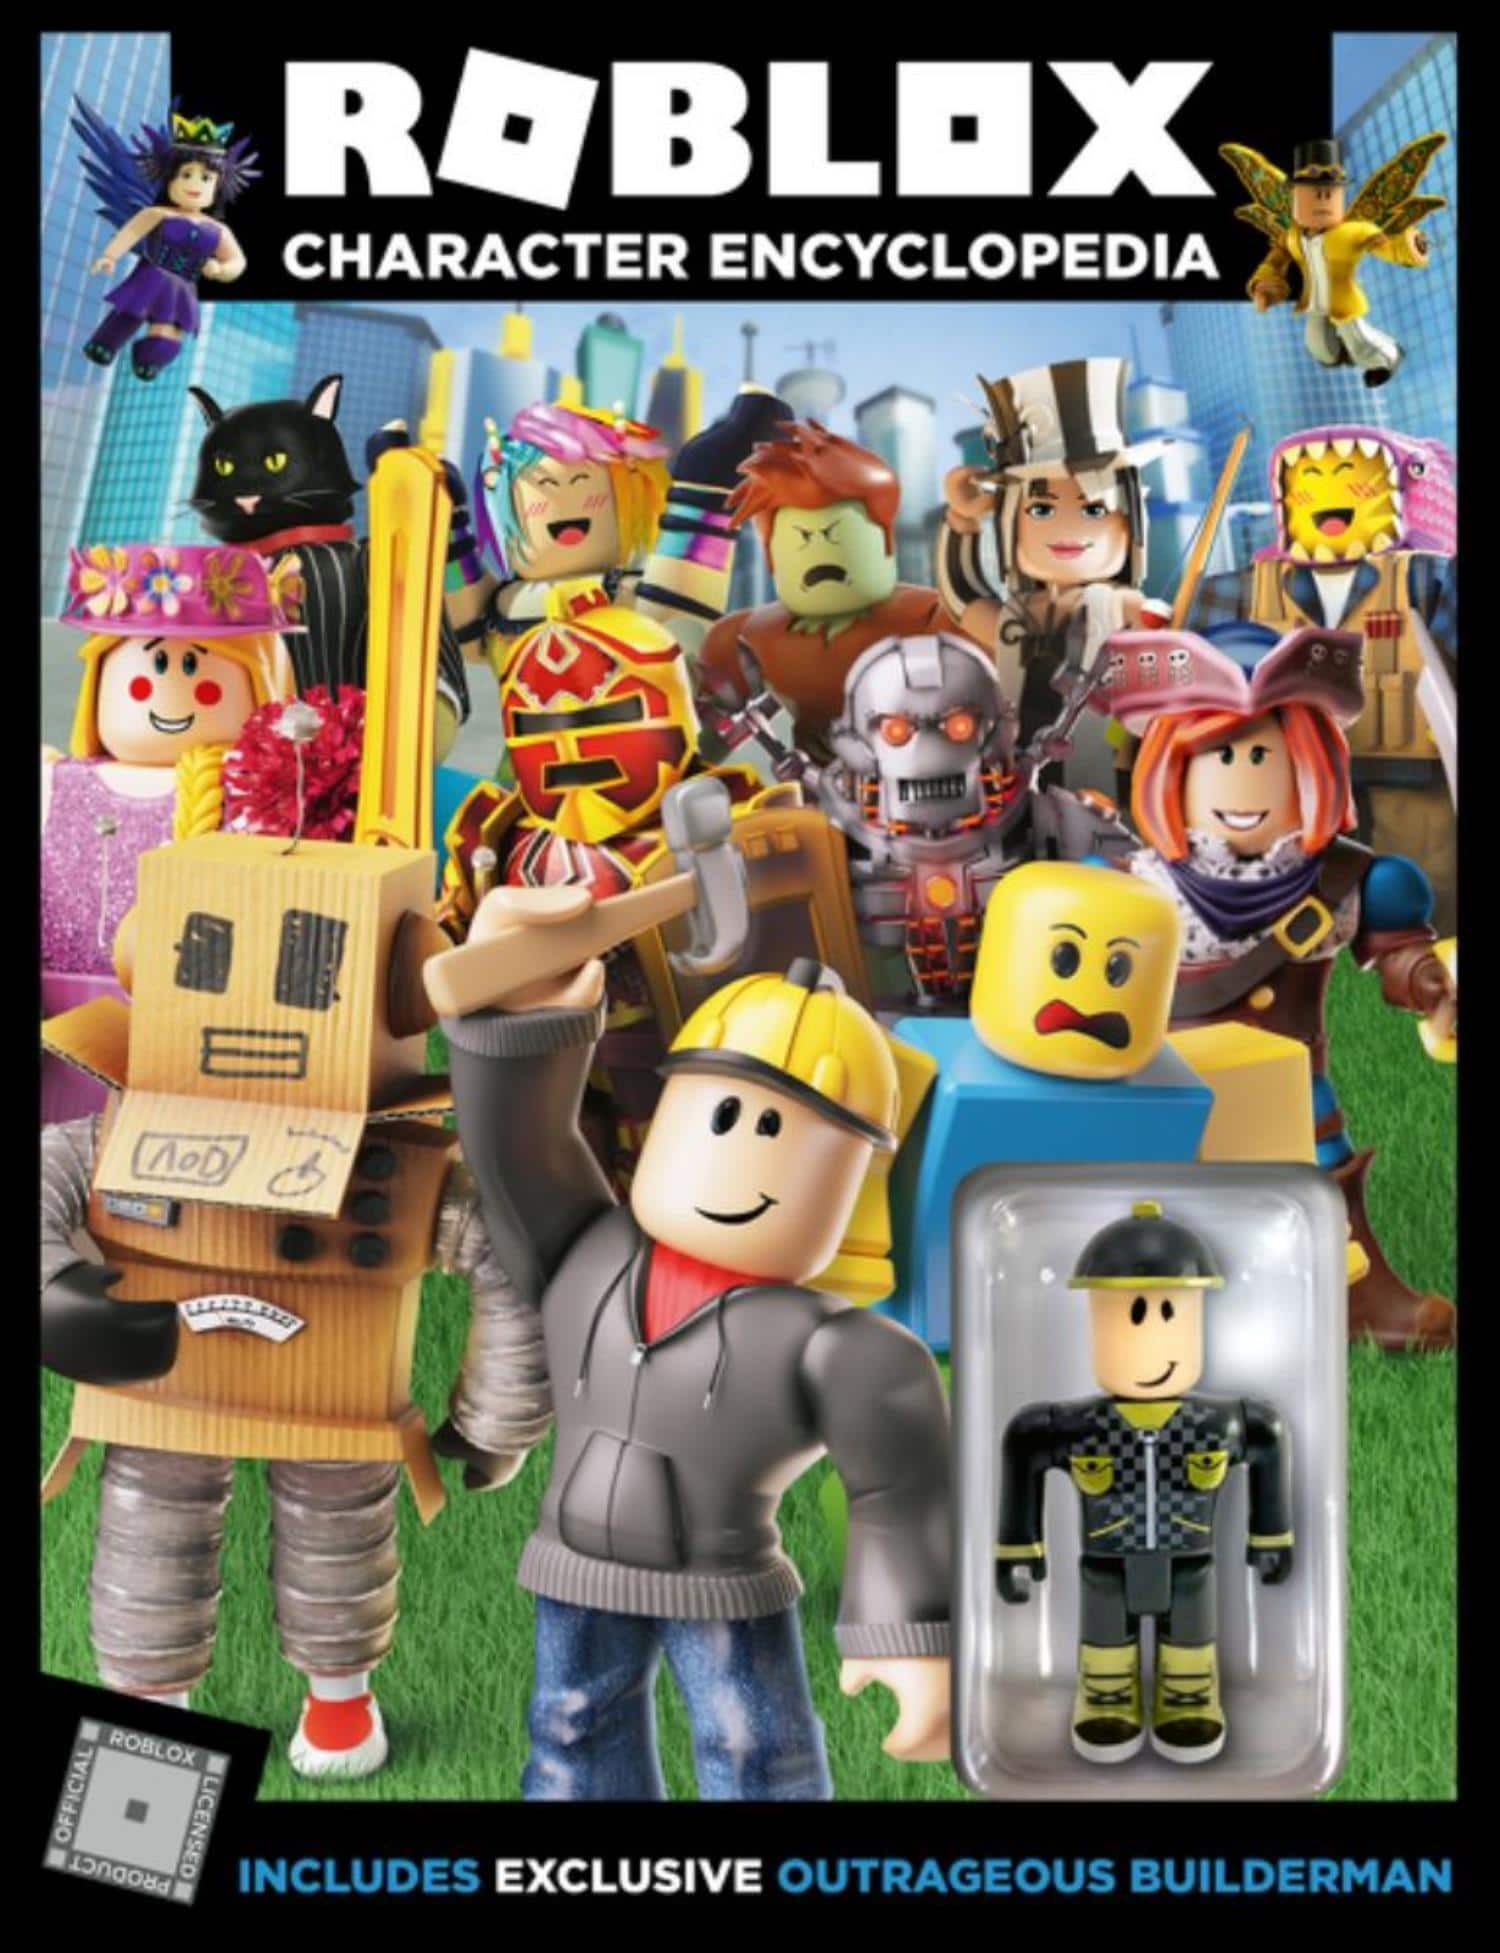 Purchase The Roblox Character Encyclopedia At Michaels - roblox promo code customize roblox avatar using roblox promo code halloween